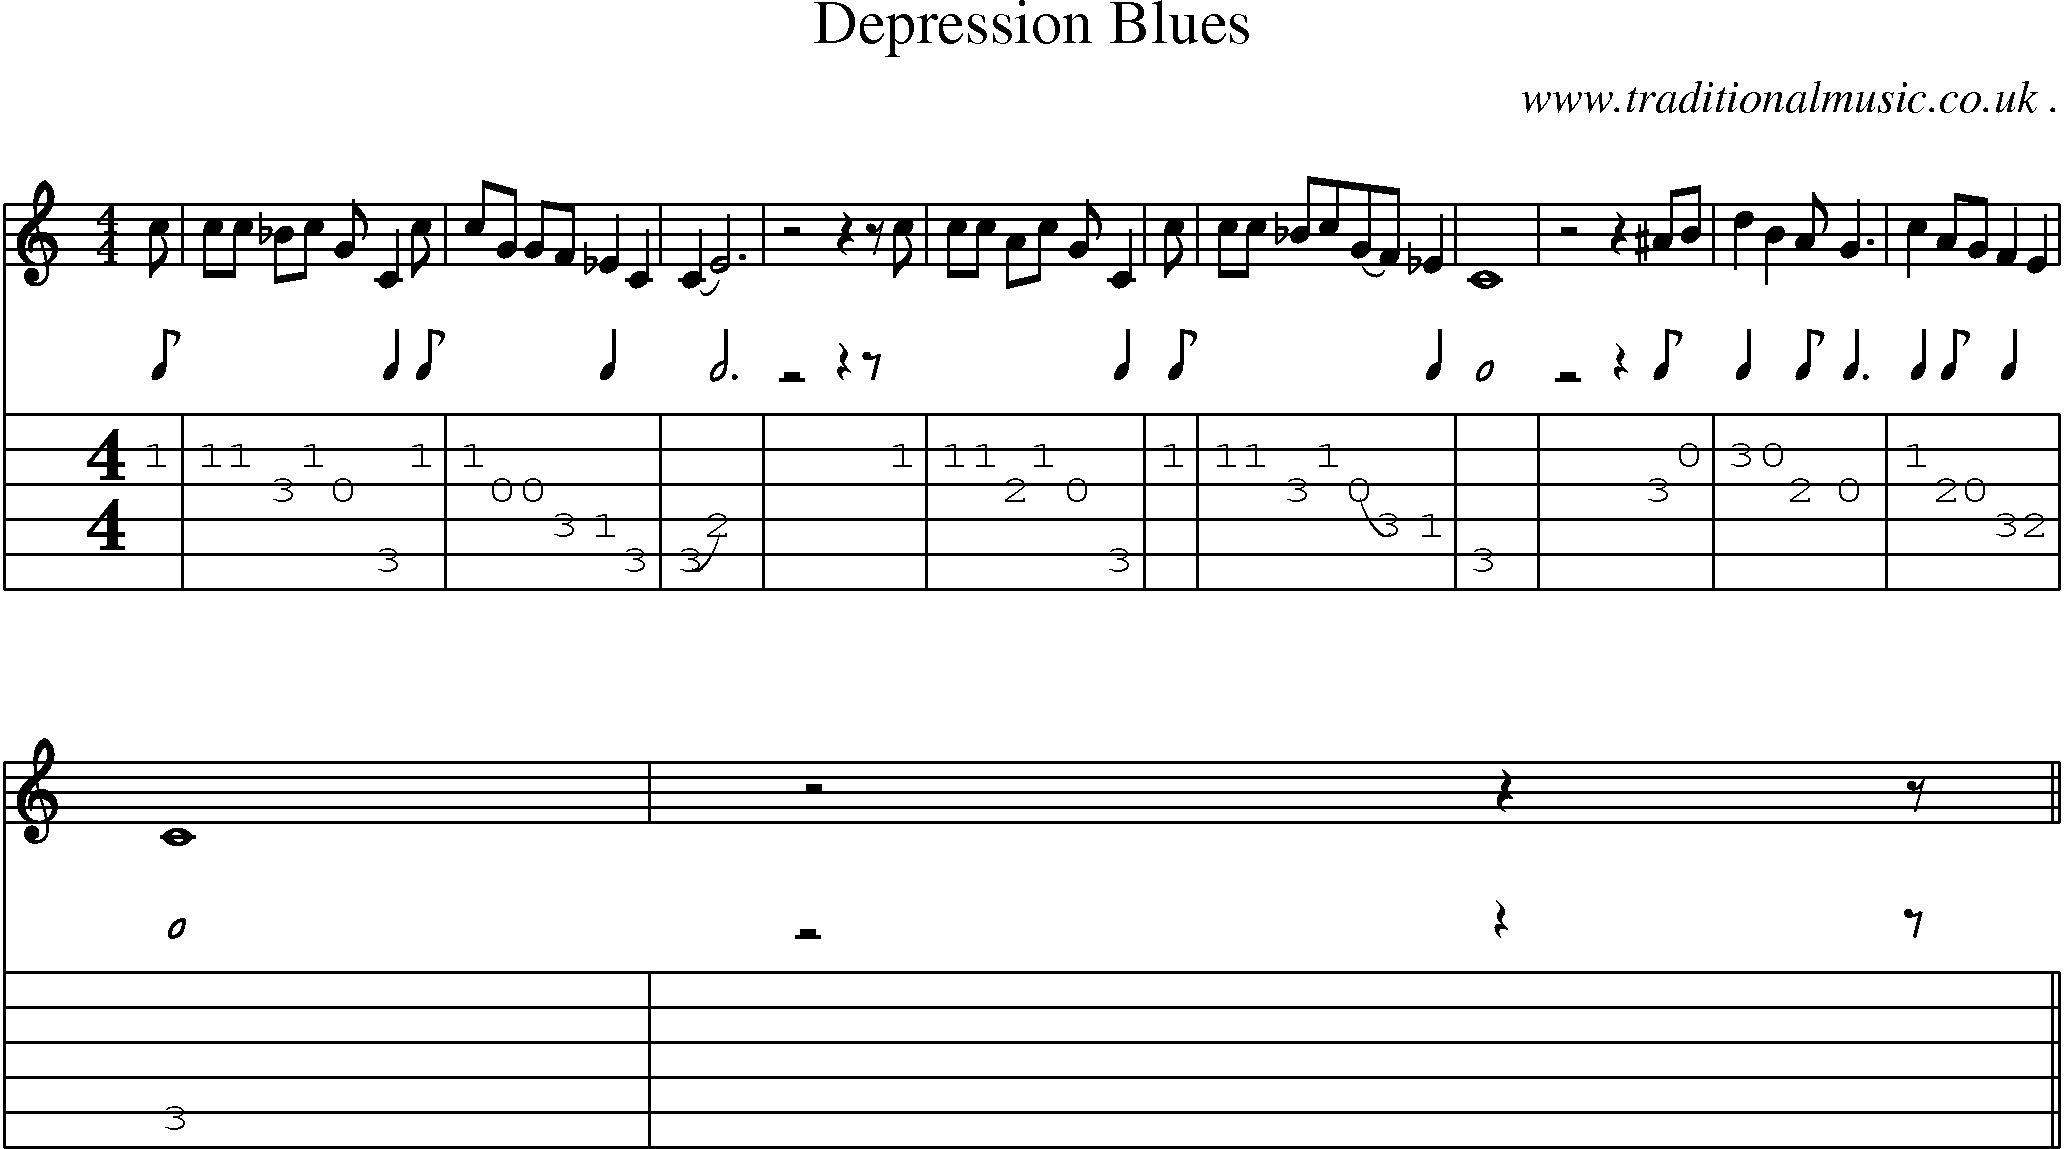 Music Score and Guitar Tabs for Depression Blues